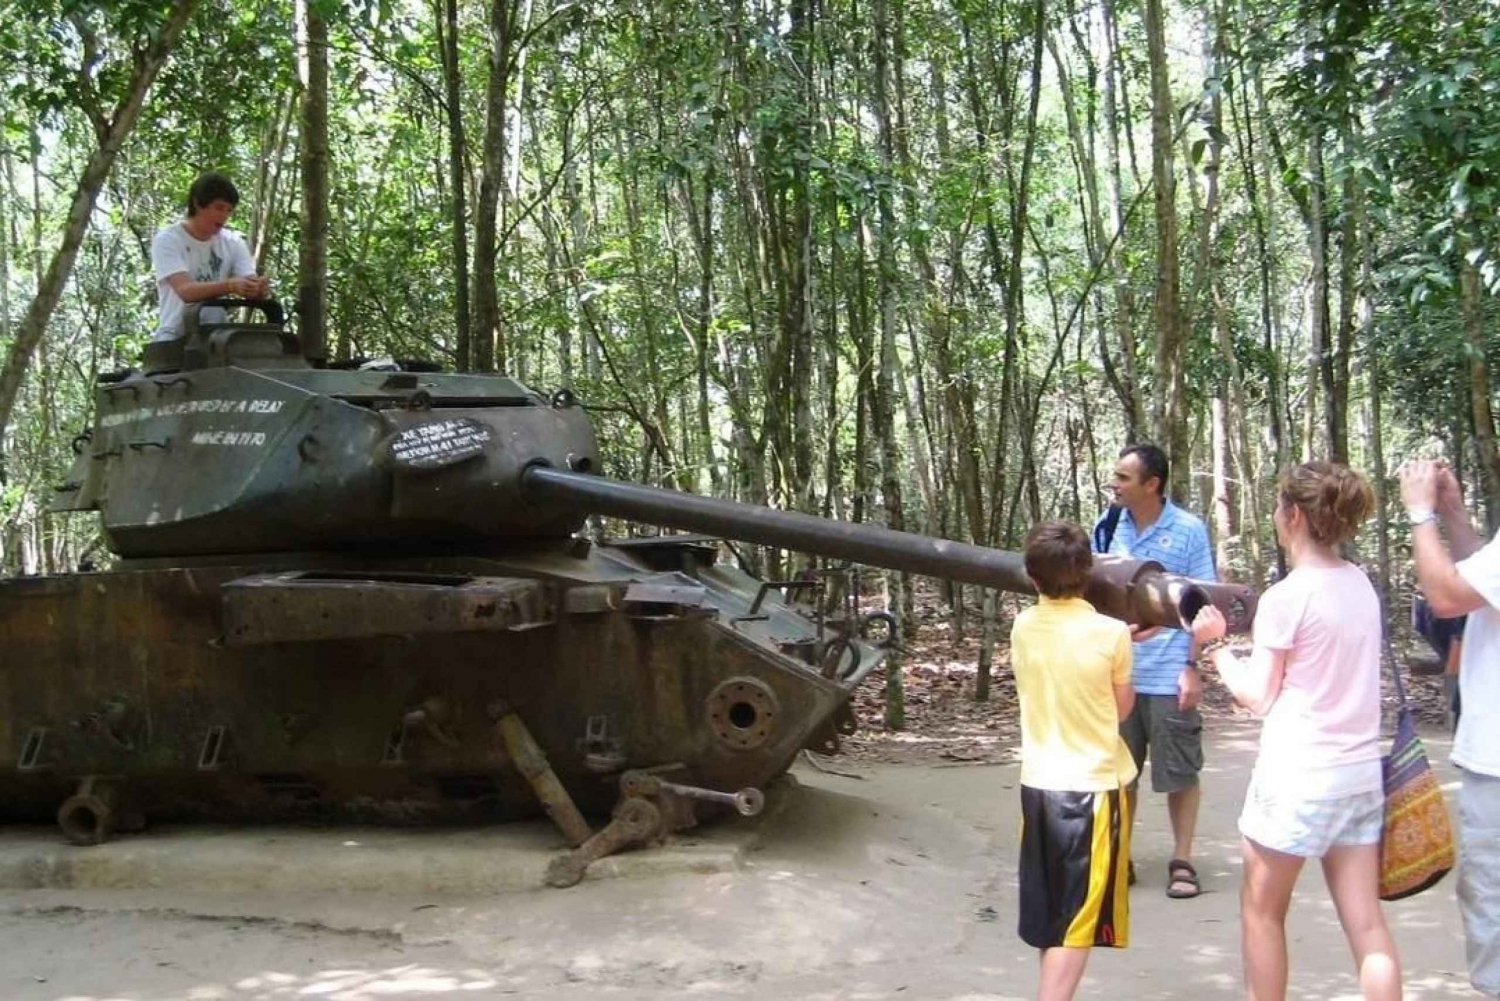 Cu Chi Tunnels and Mekong Delta 1 Day Tour